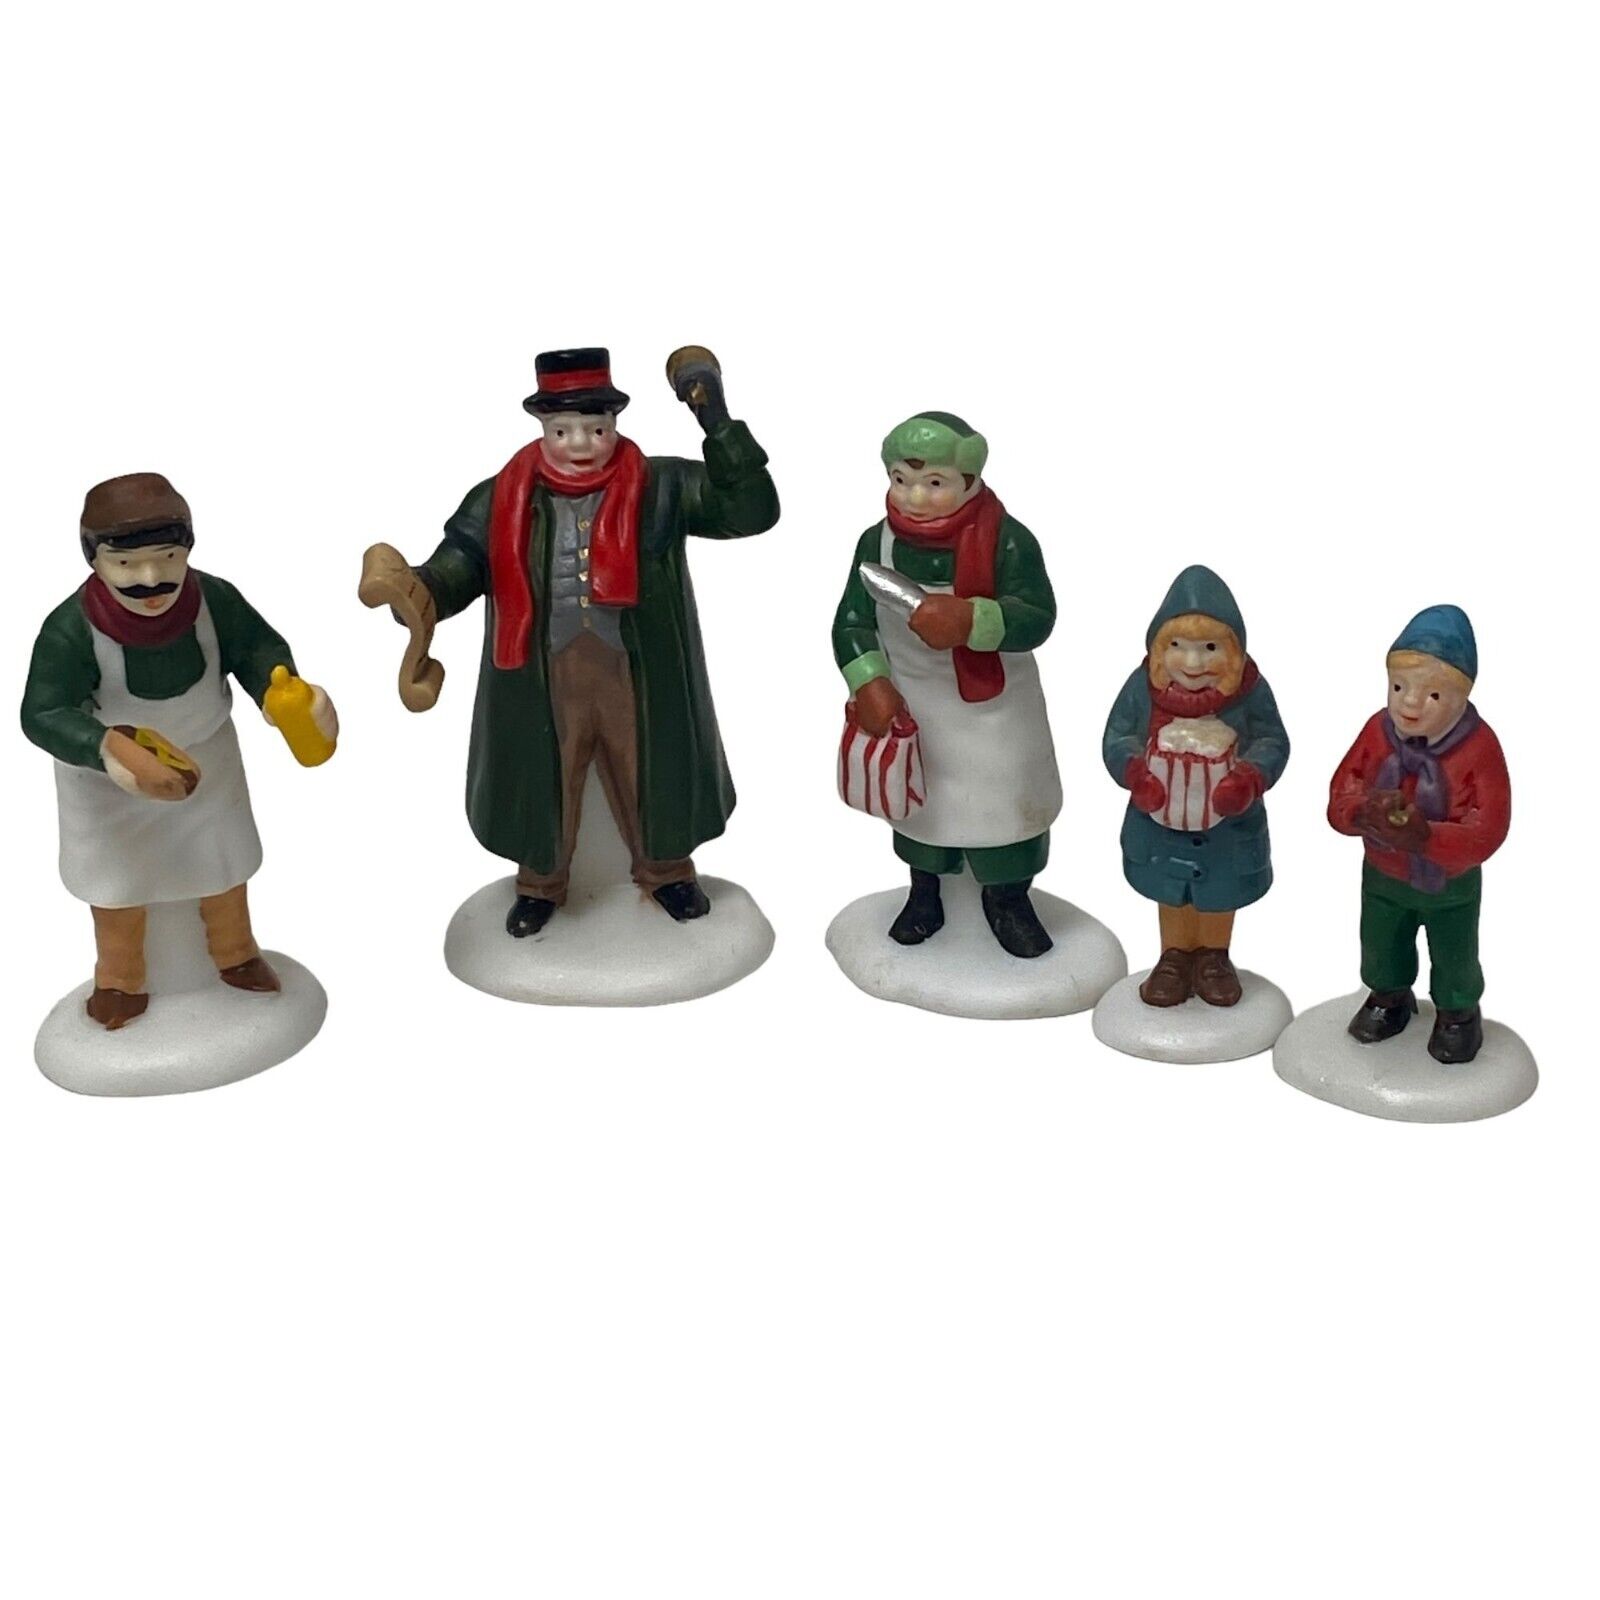 Department 56 Holiday Figurines Lot of 5 Ceramic Christmas Village Collectibles